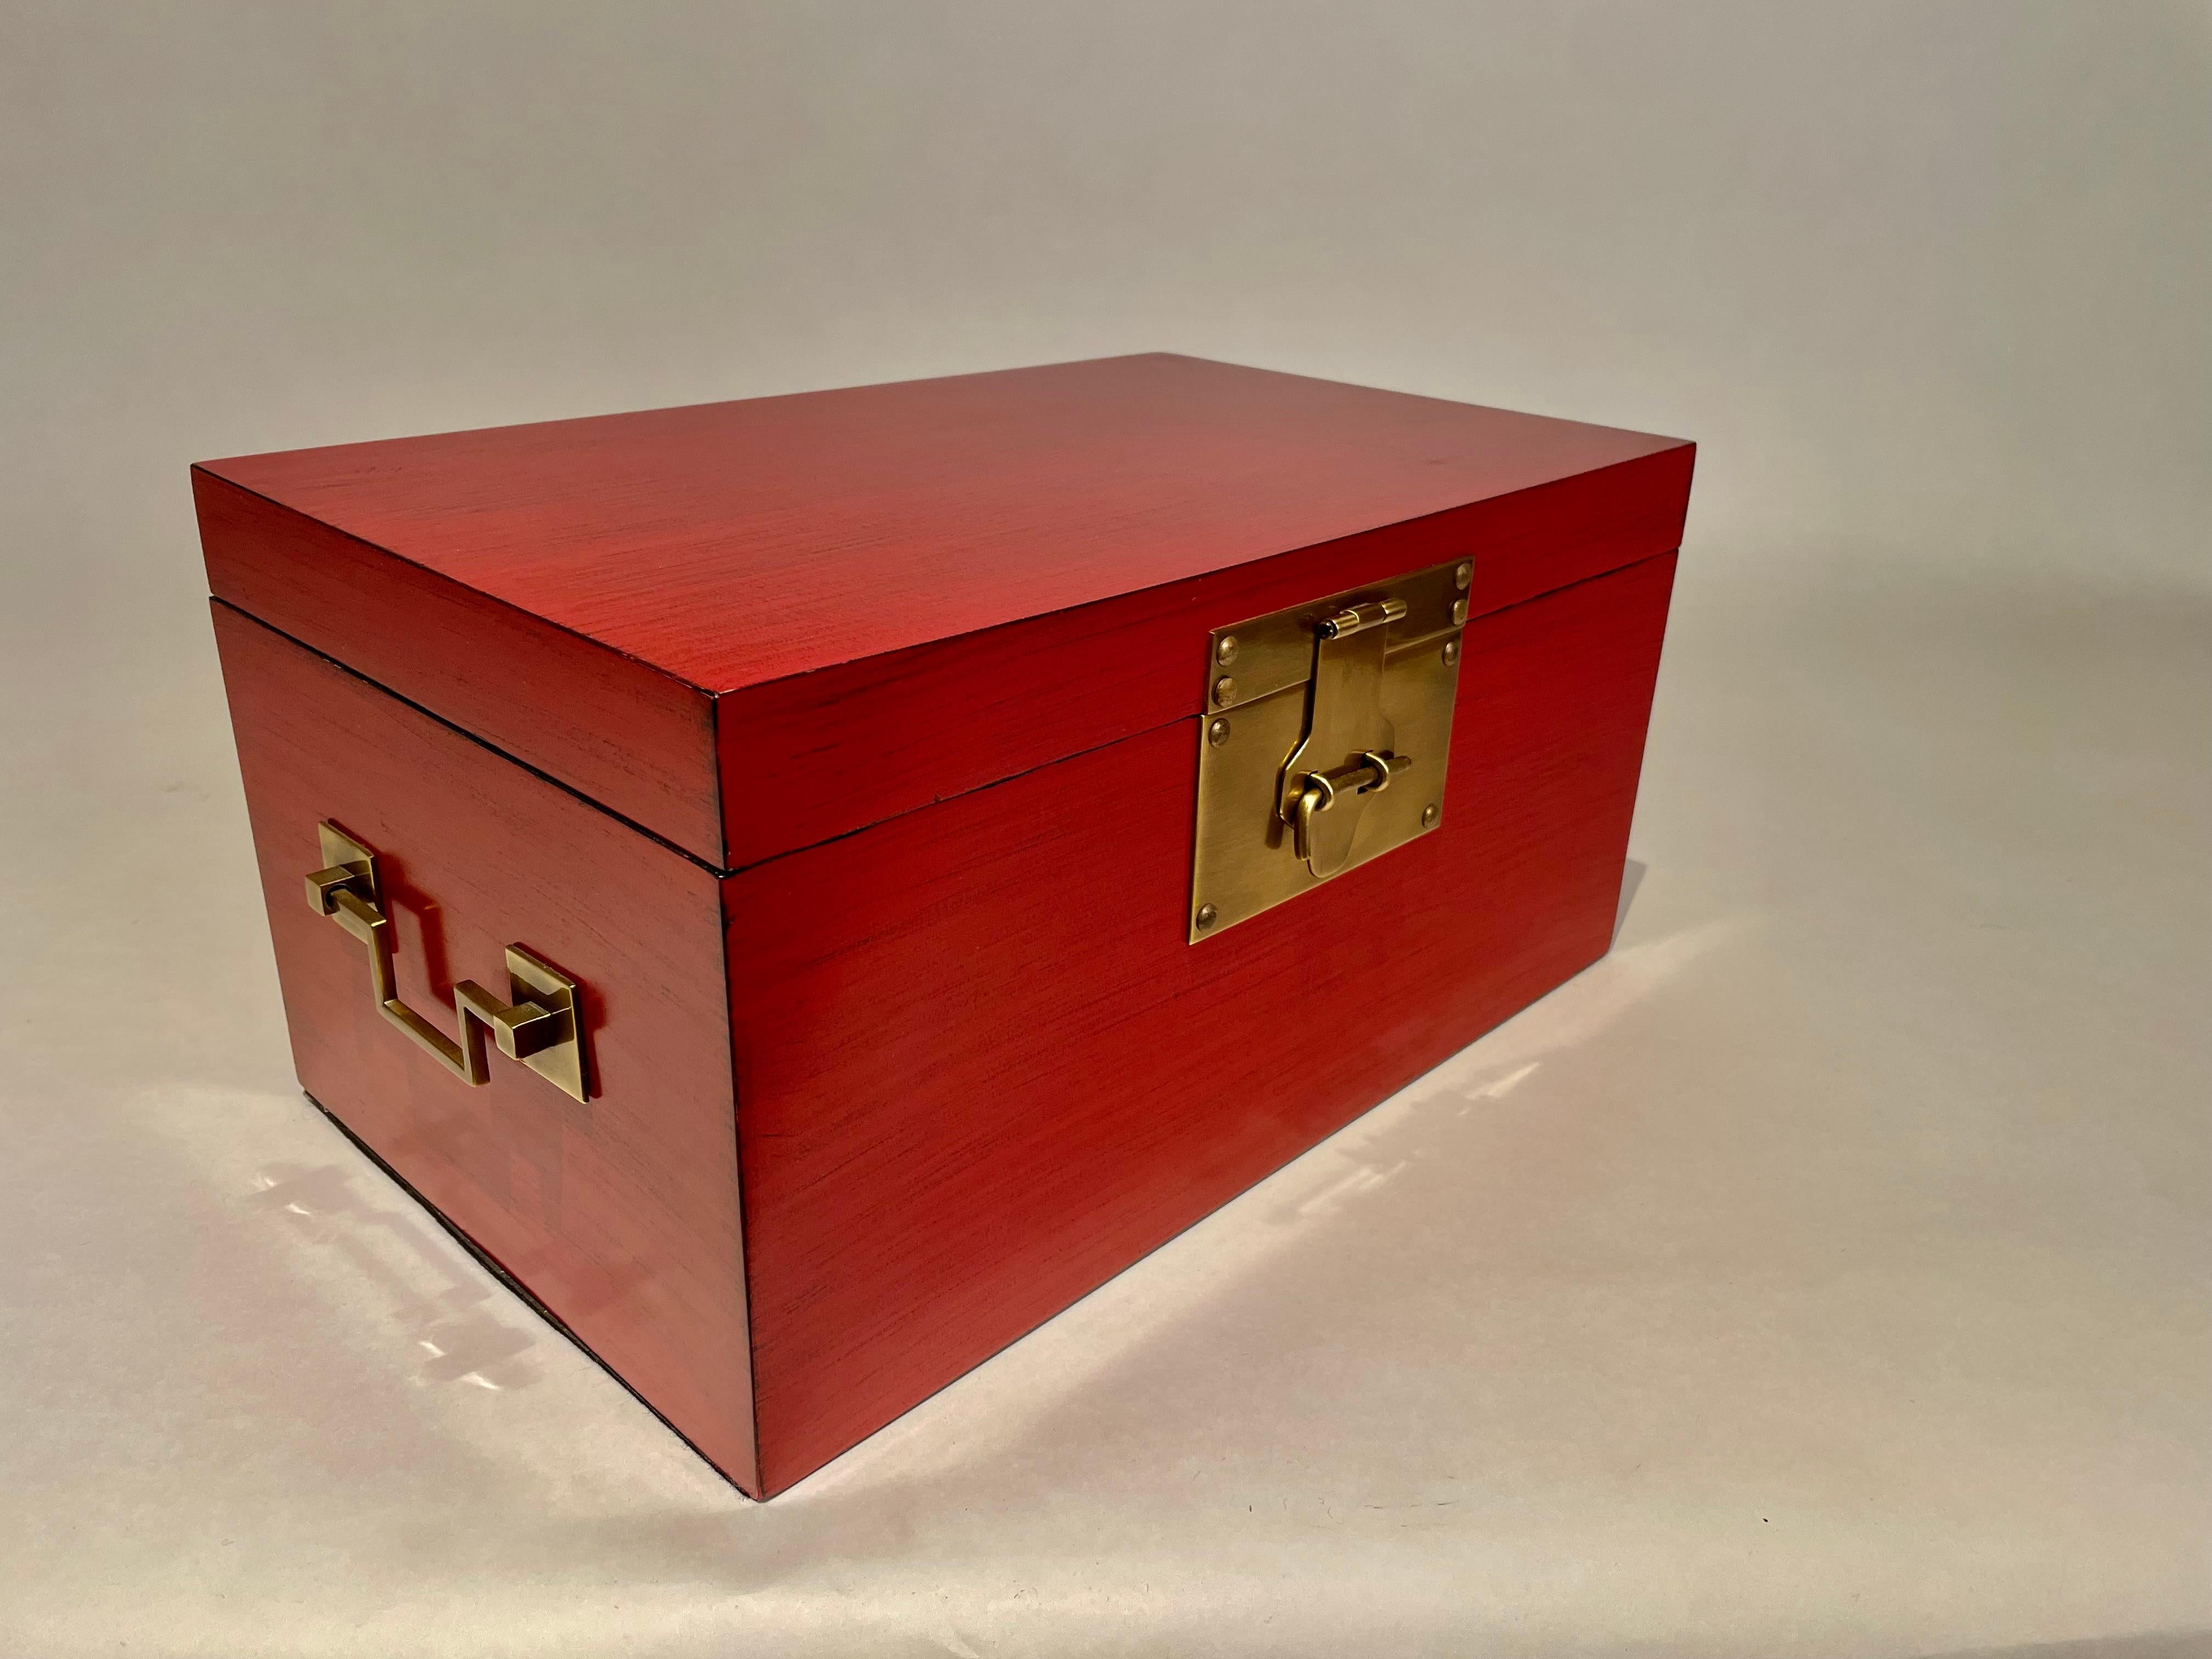 Chinese red and black lacquered box with fine brass mounts in the Chinese Export style. Lovely color. A refined and classic decorative box, beautiful craftsmanship. 
16 inches wide, 10 deep 8 high
We also have a larger companion box, they look great